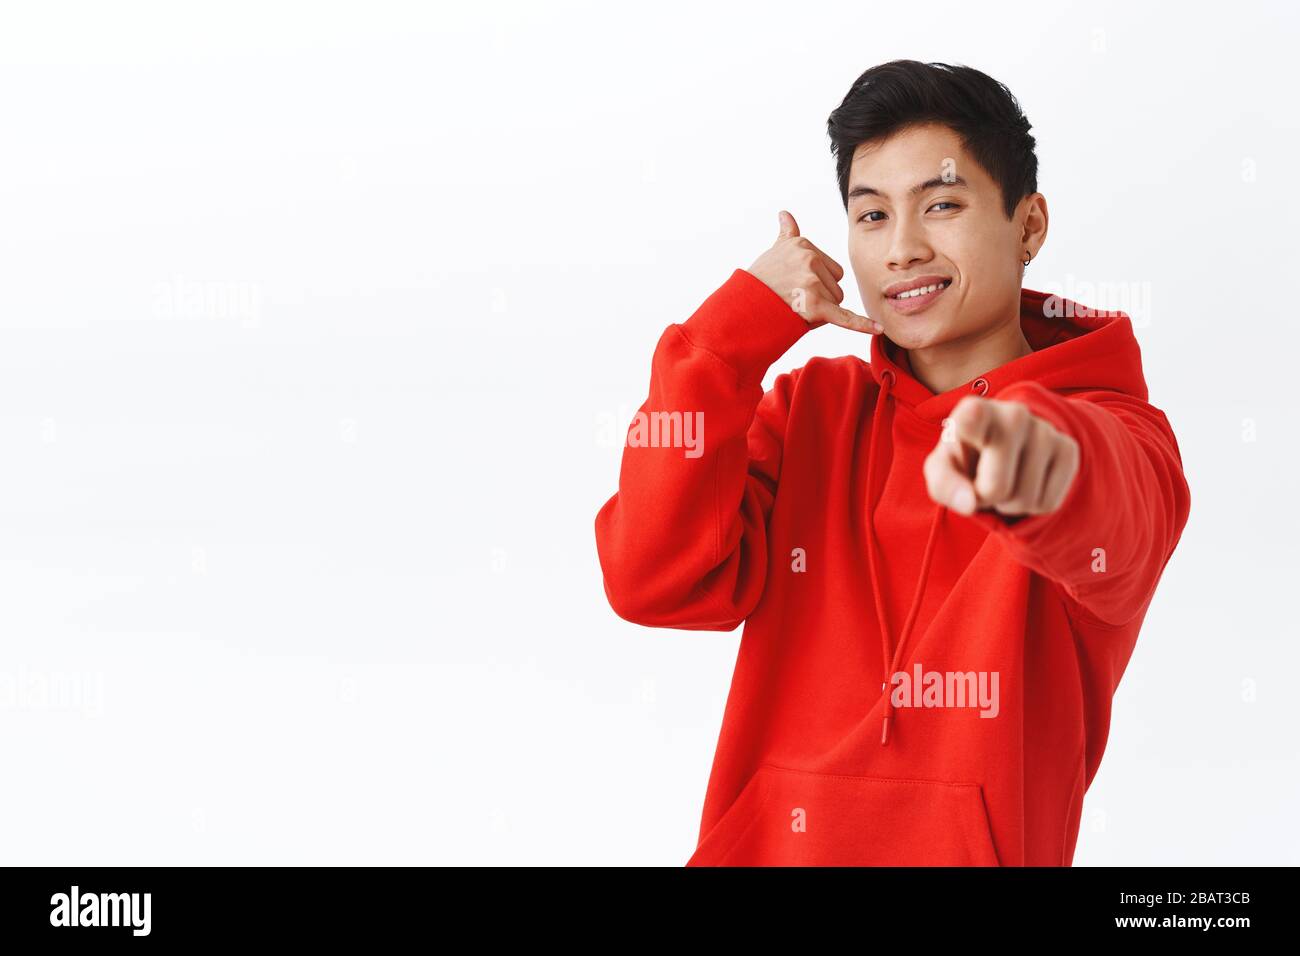 Call Me Maybe Portrait Of Cheeky Asian Man In Red Hoodie Pointing At Camera Smiling Sassy And Make Phone Gesture As If Asking Number Flirting With Stock Photo Alamy